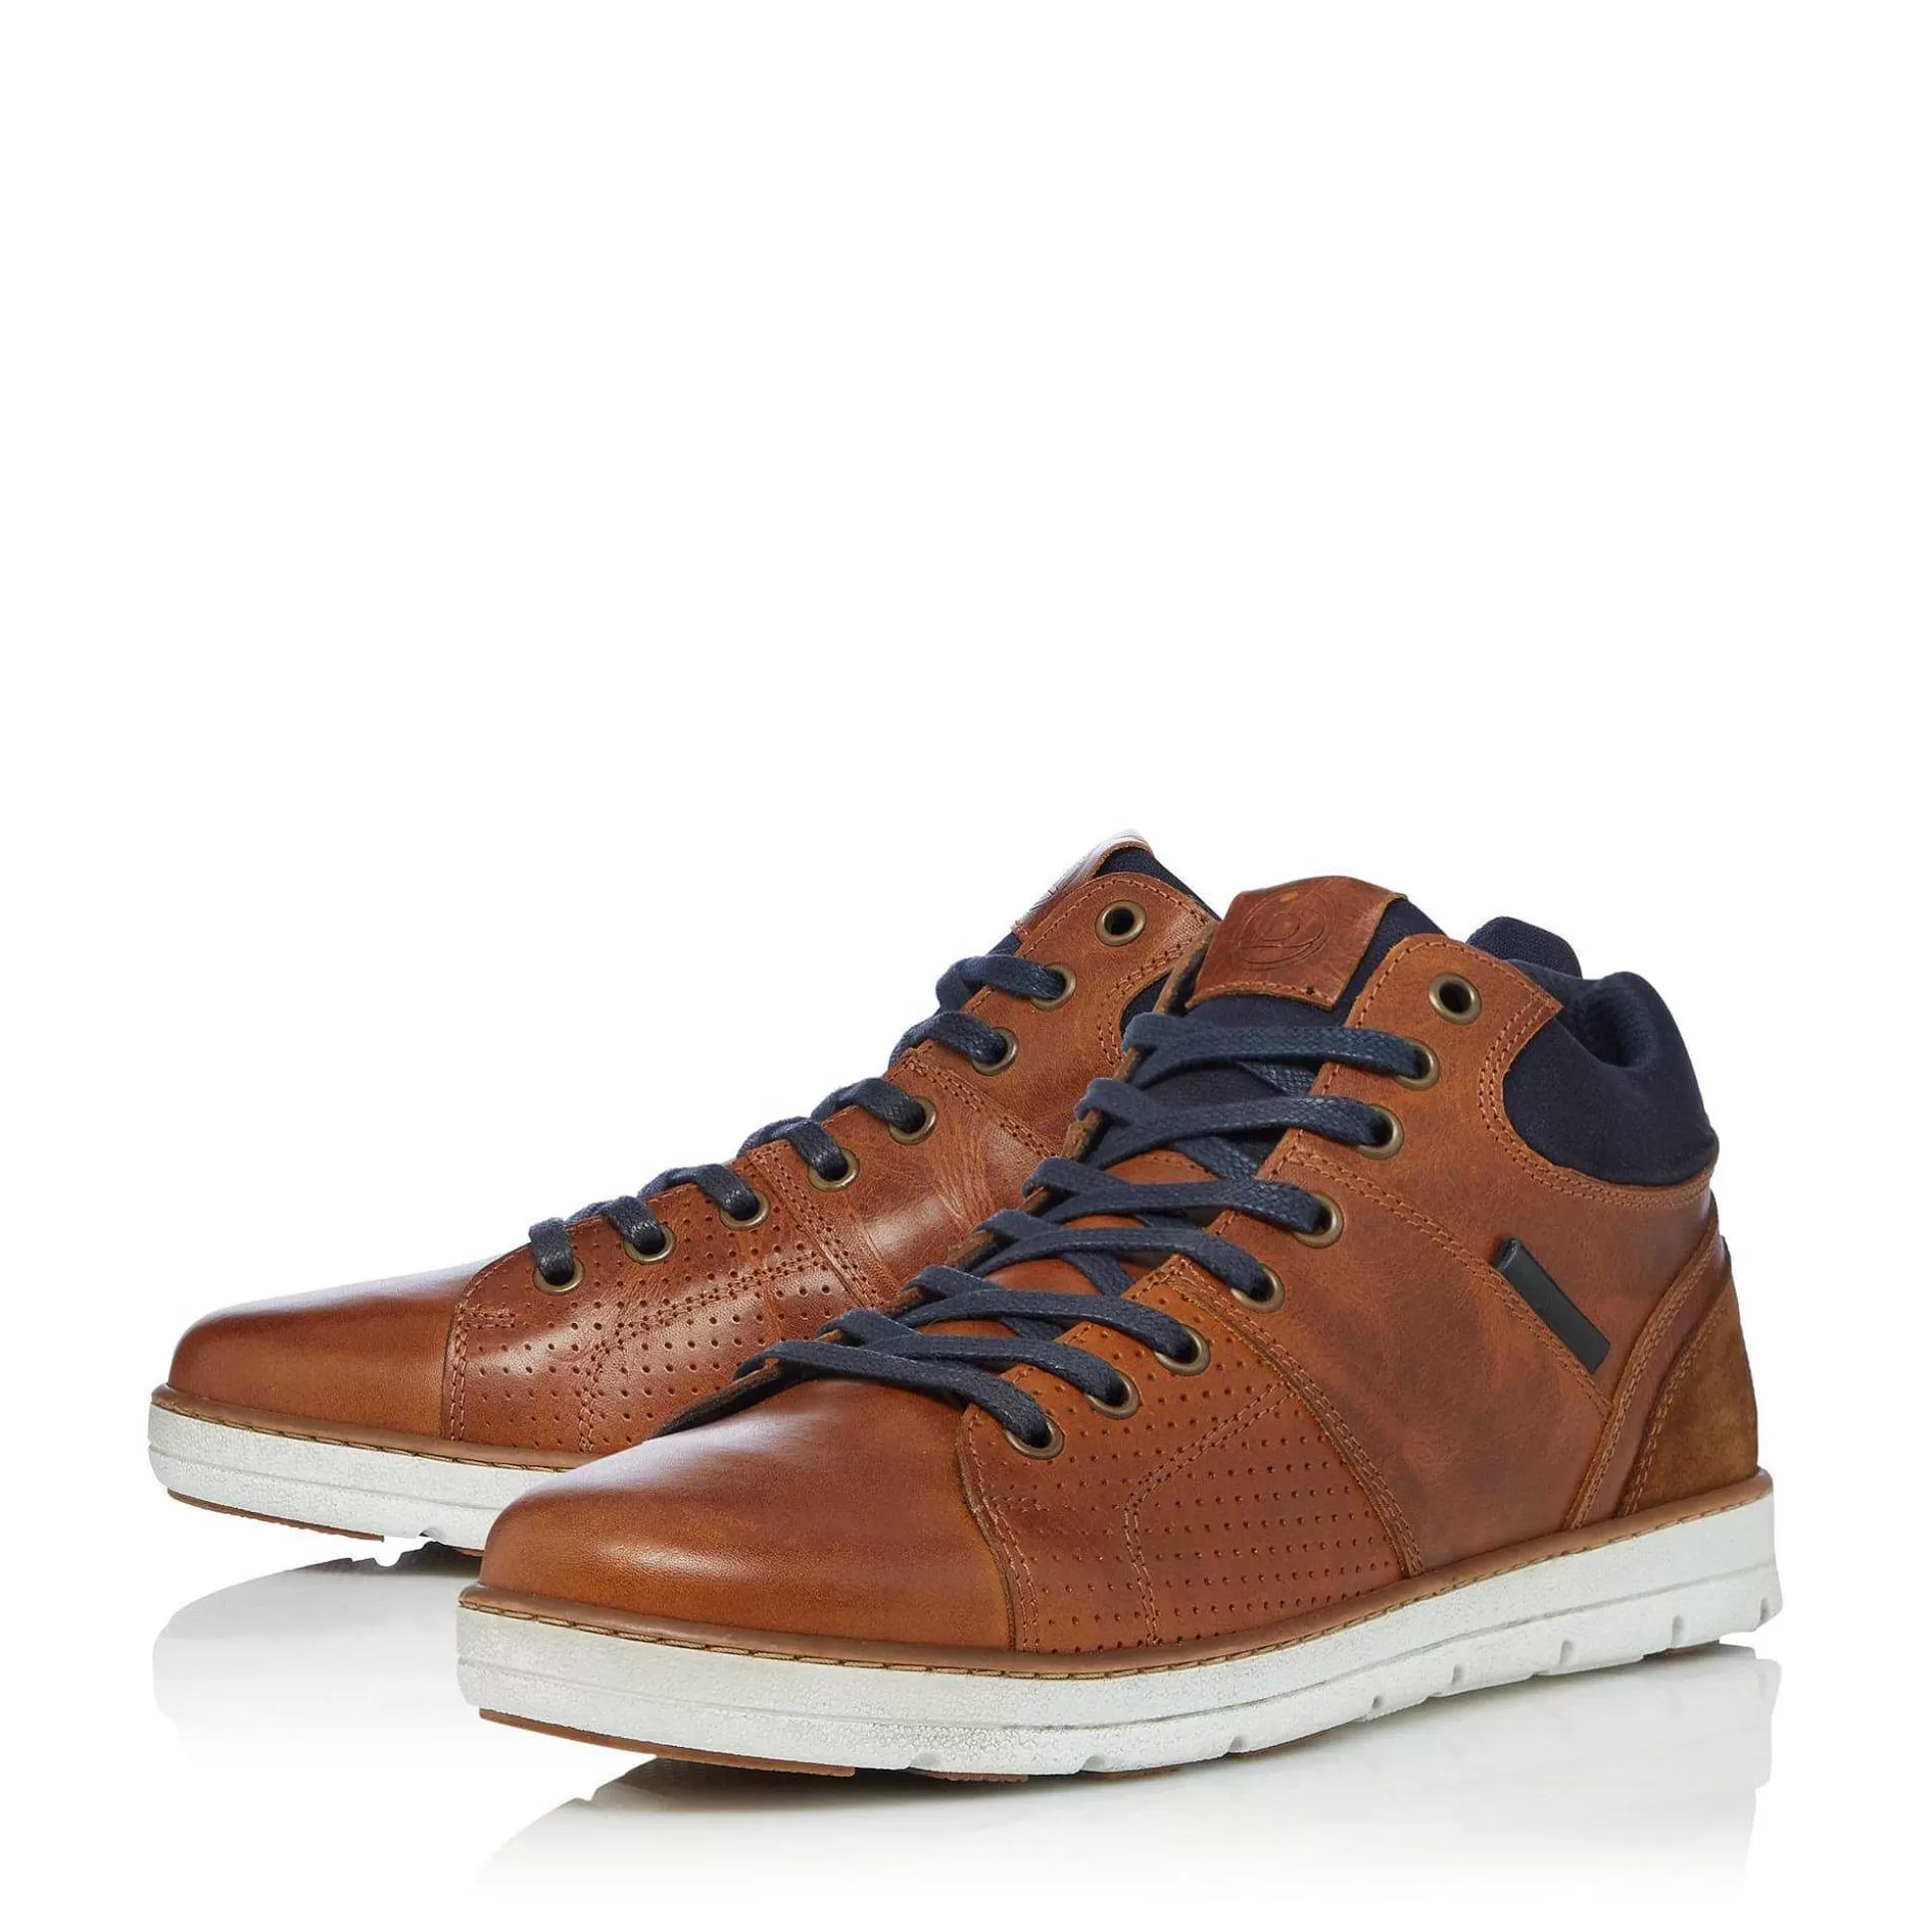 Dune London STAKES - TAN-Men Casual Shoes | Trainers